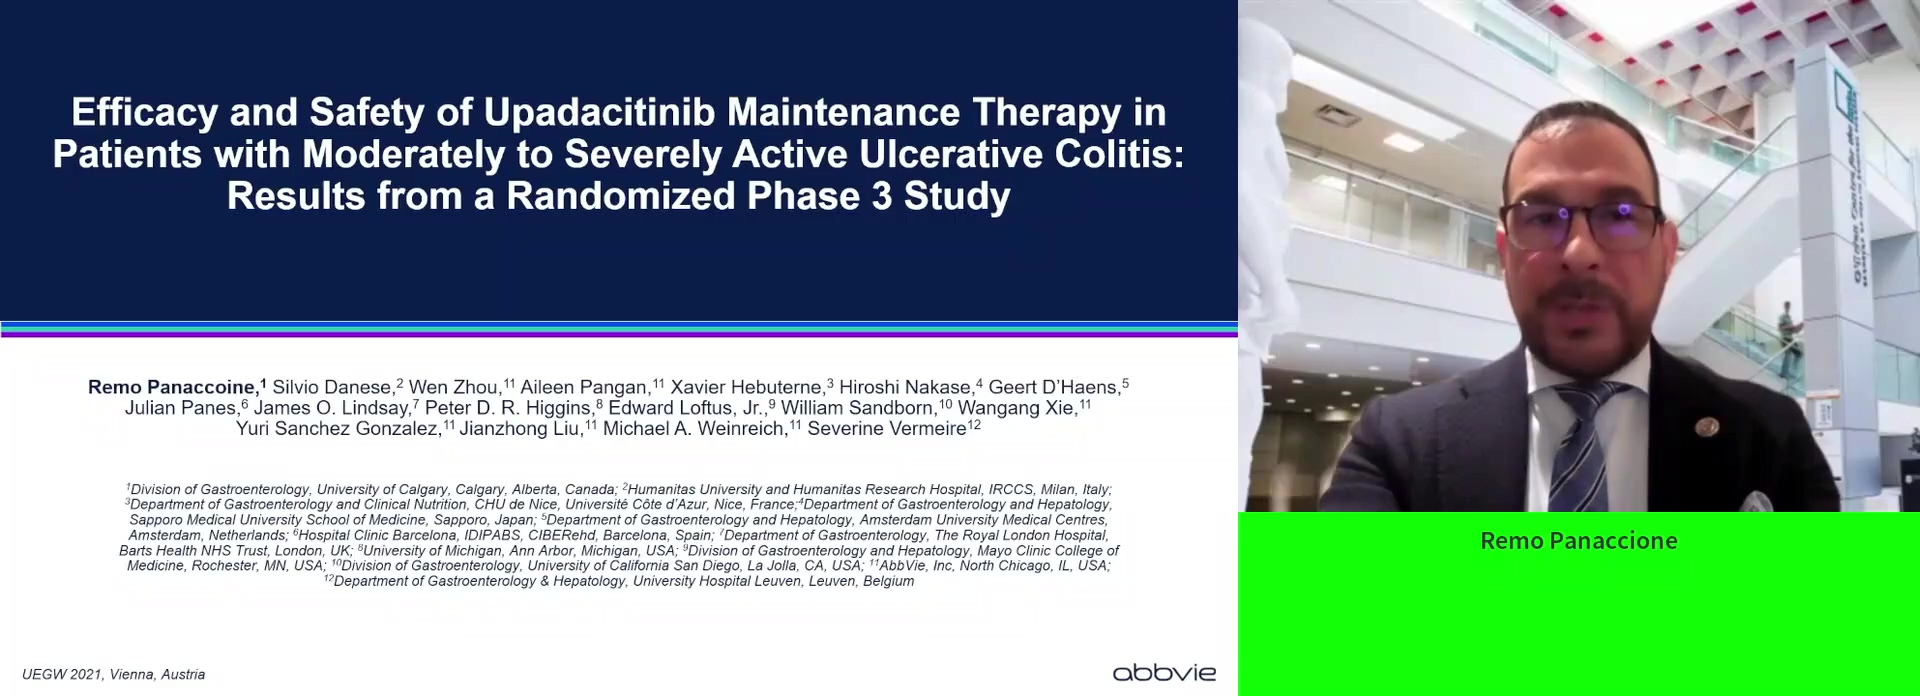 EFFICACY AND SAFETY OF UPADACITINIB MAINTENANCE THERAPY IN PATIENTS WITH MODERATELY TO SEVERELY ACTIVE ULCERATIVE COLITIS: RESULTS FROM A RANDOMIZED PHASE 3 STUDY